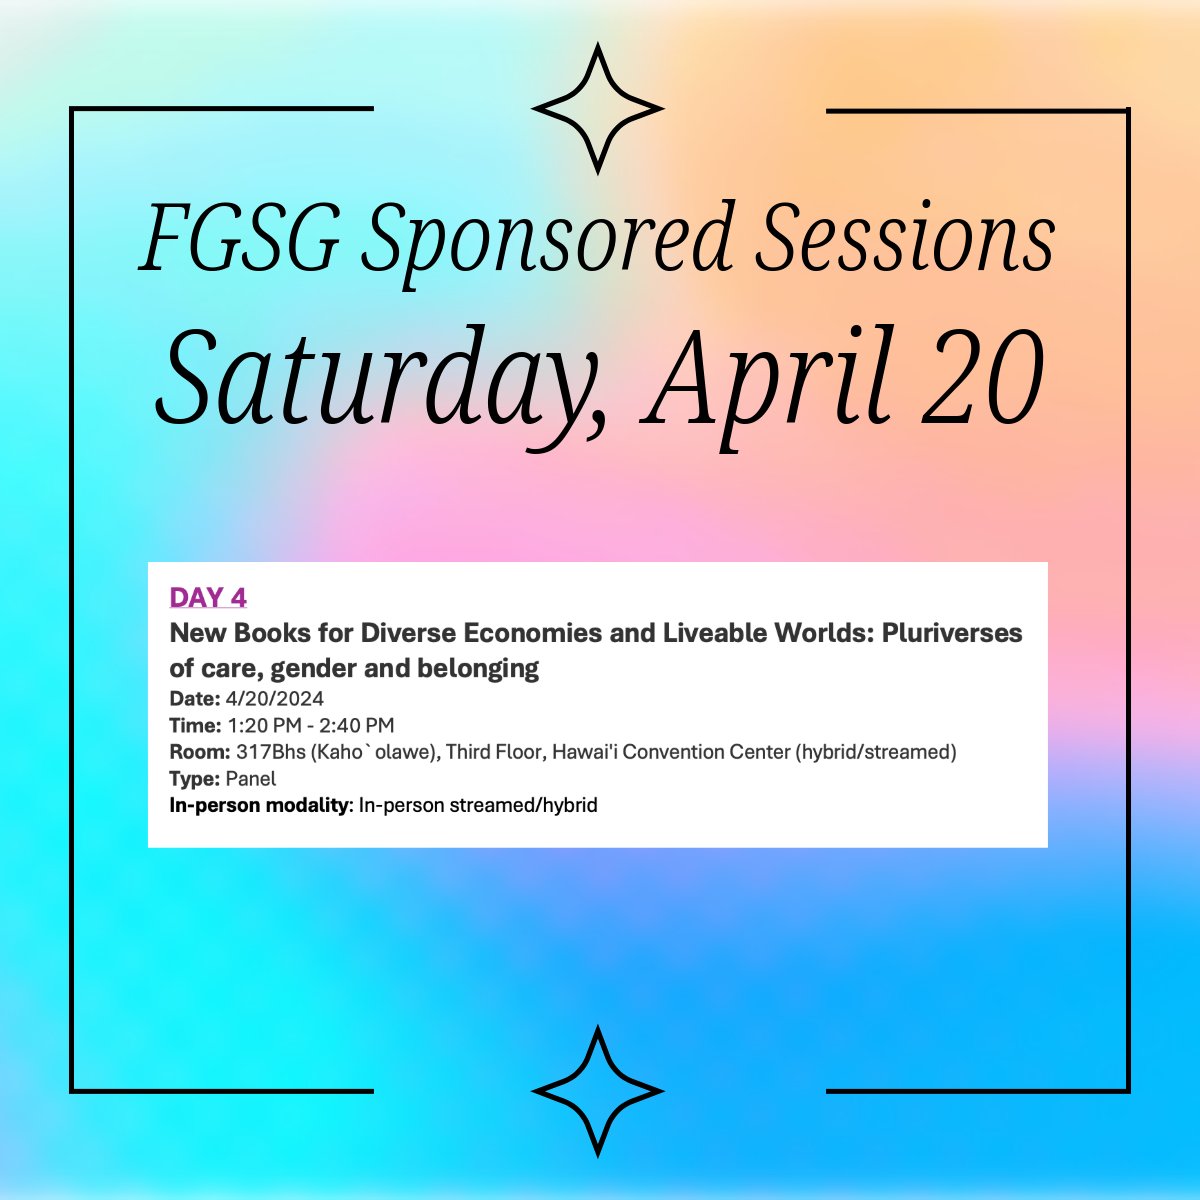 Here's what we have going on @theAAG for Friday and Saturday! #AAG2024